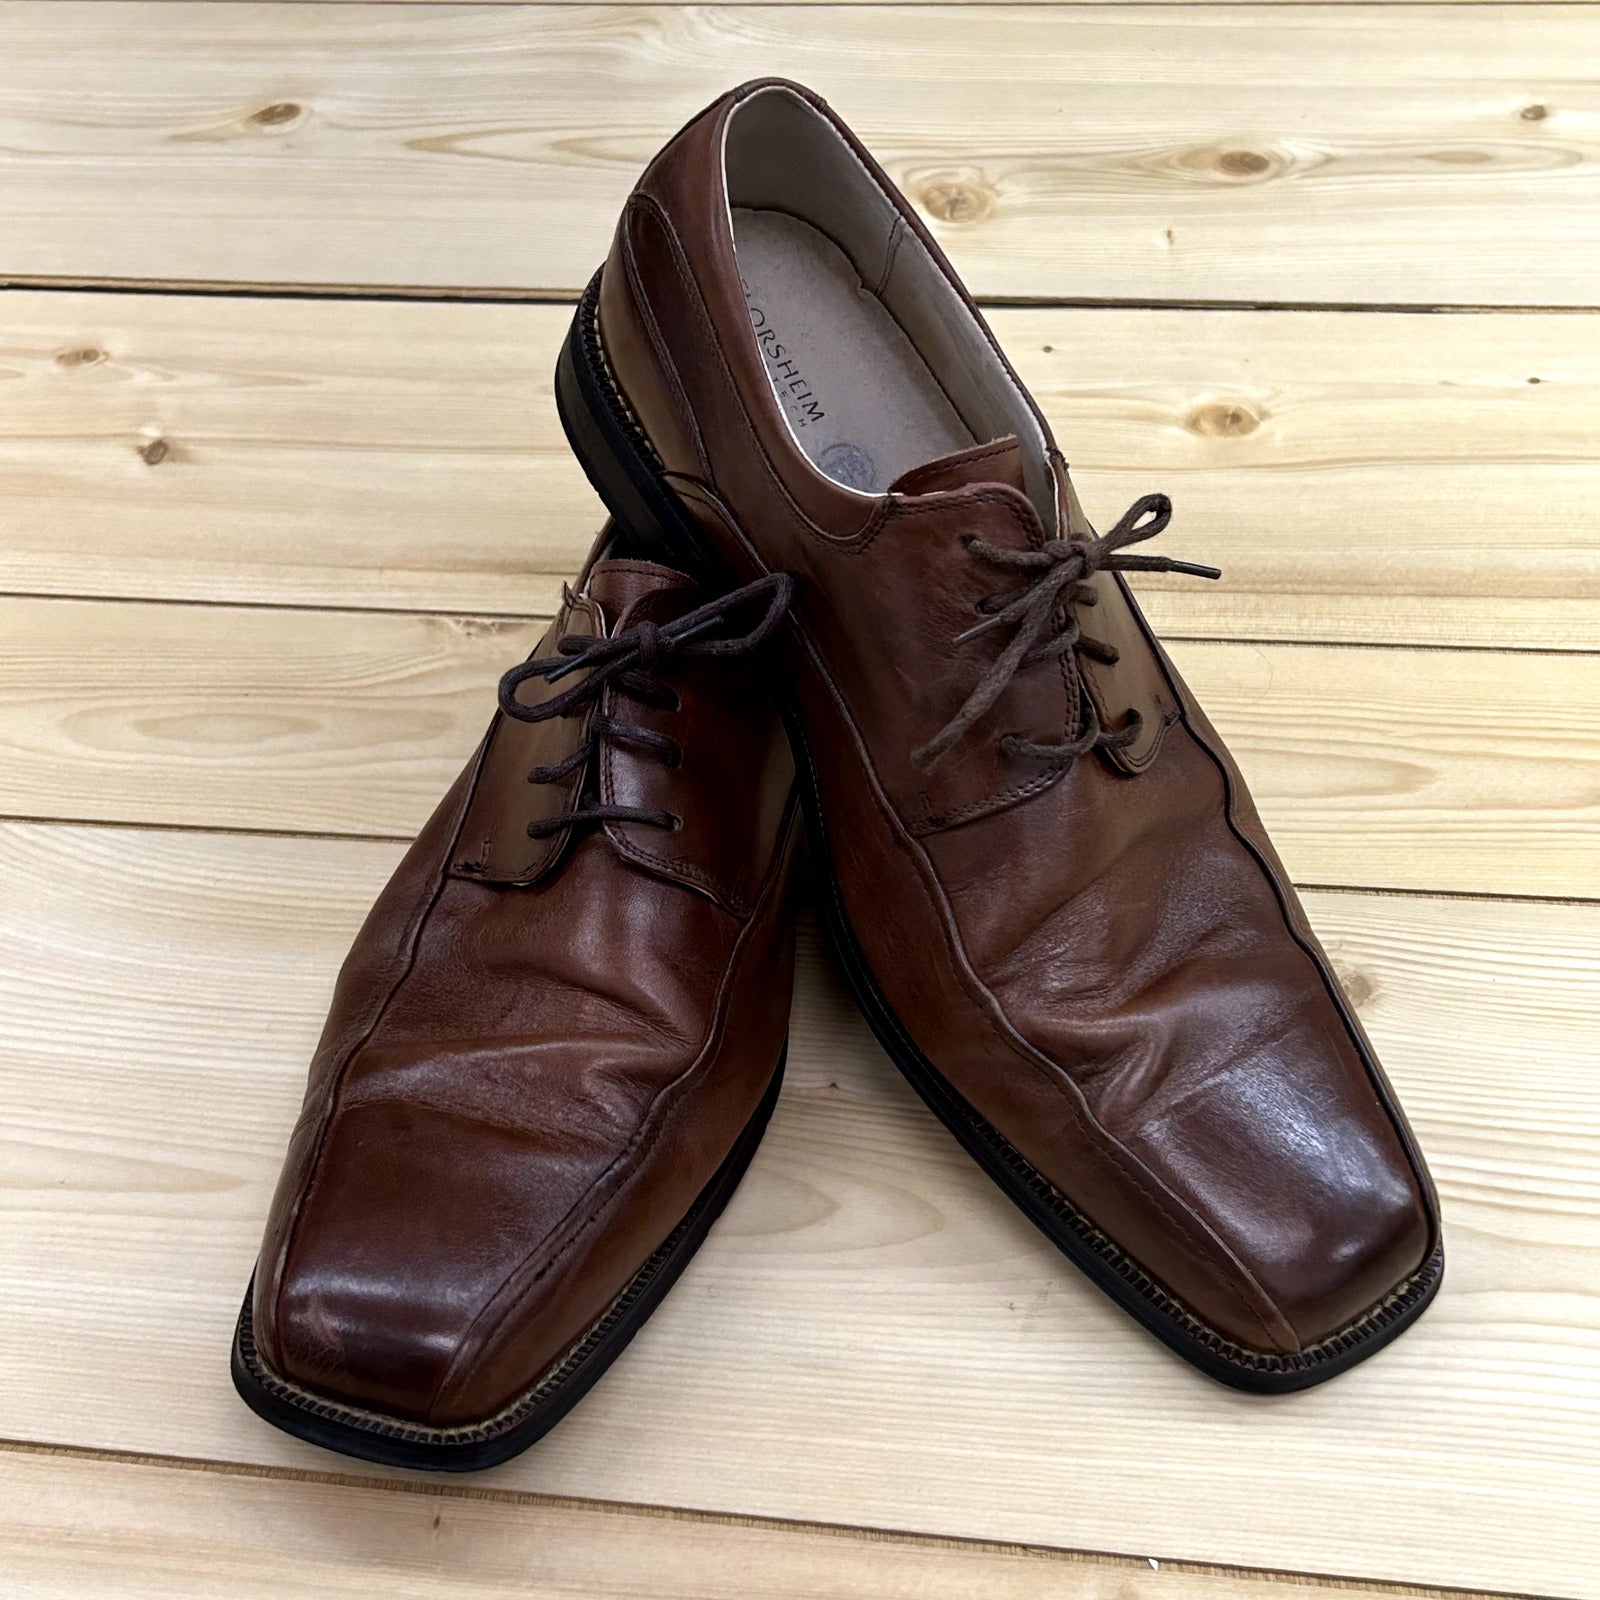 Florsheim Brown Leather Bicycle Toe Oxford Shoes Mens Size 13D 11256-200 Lace Up